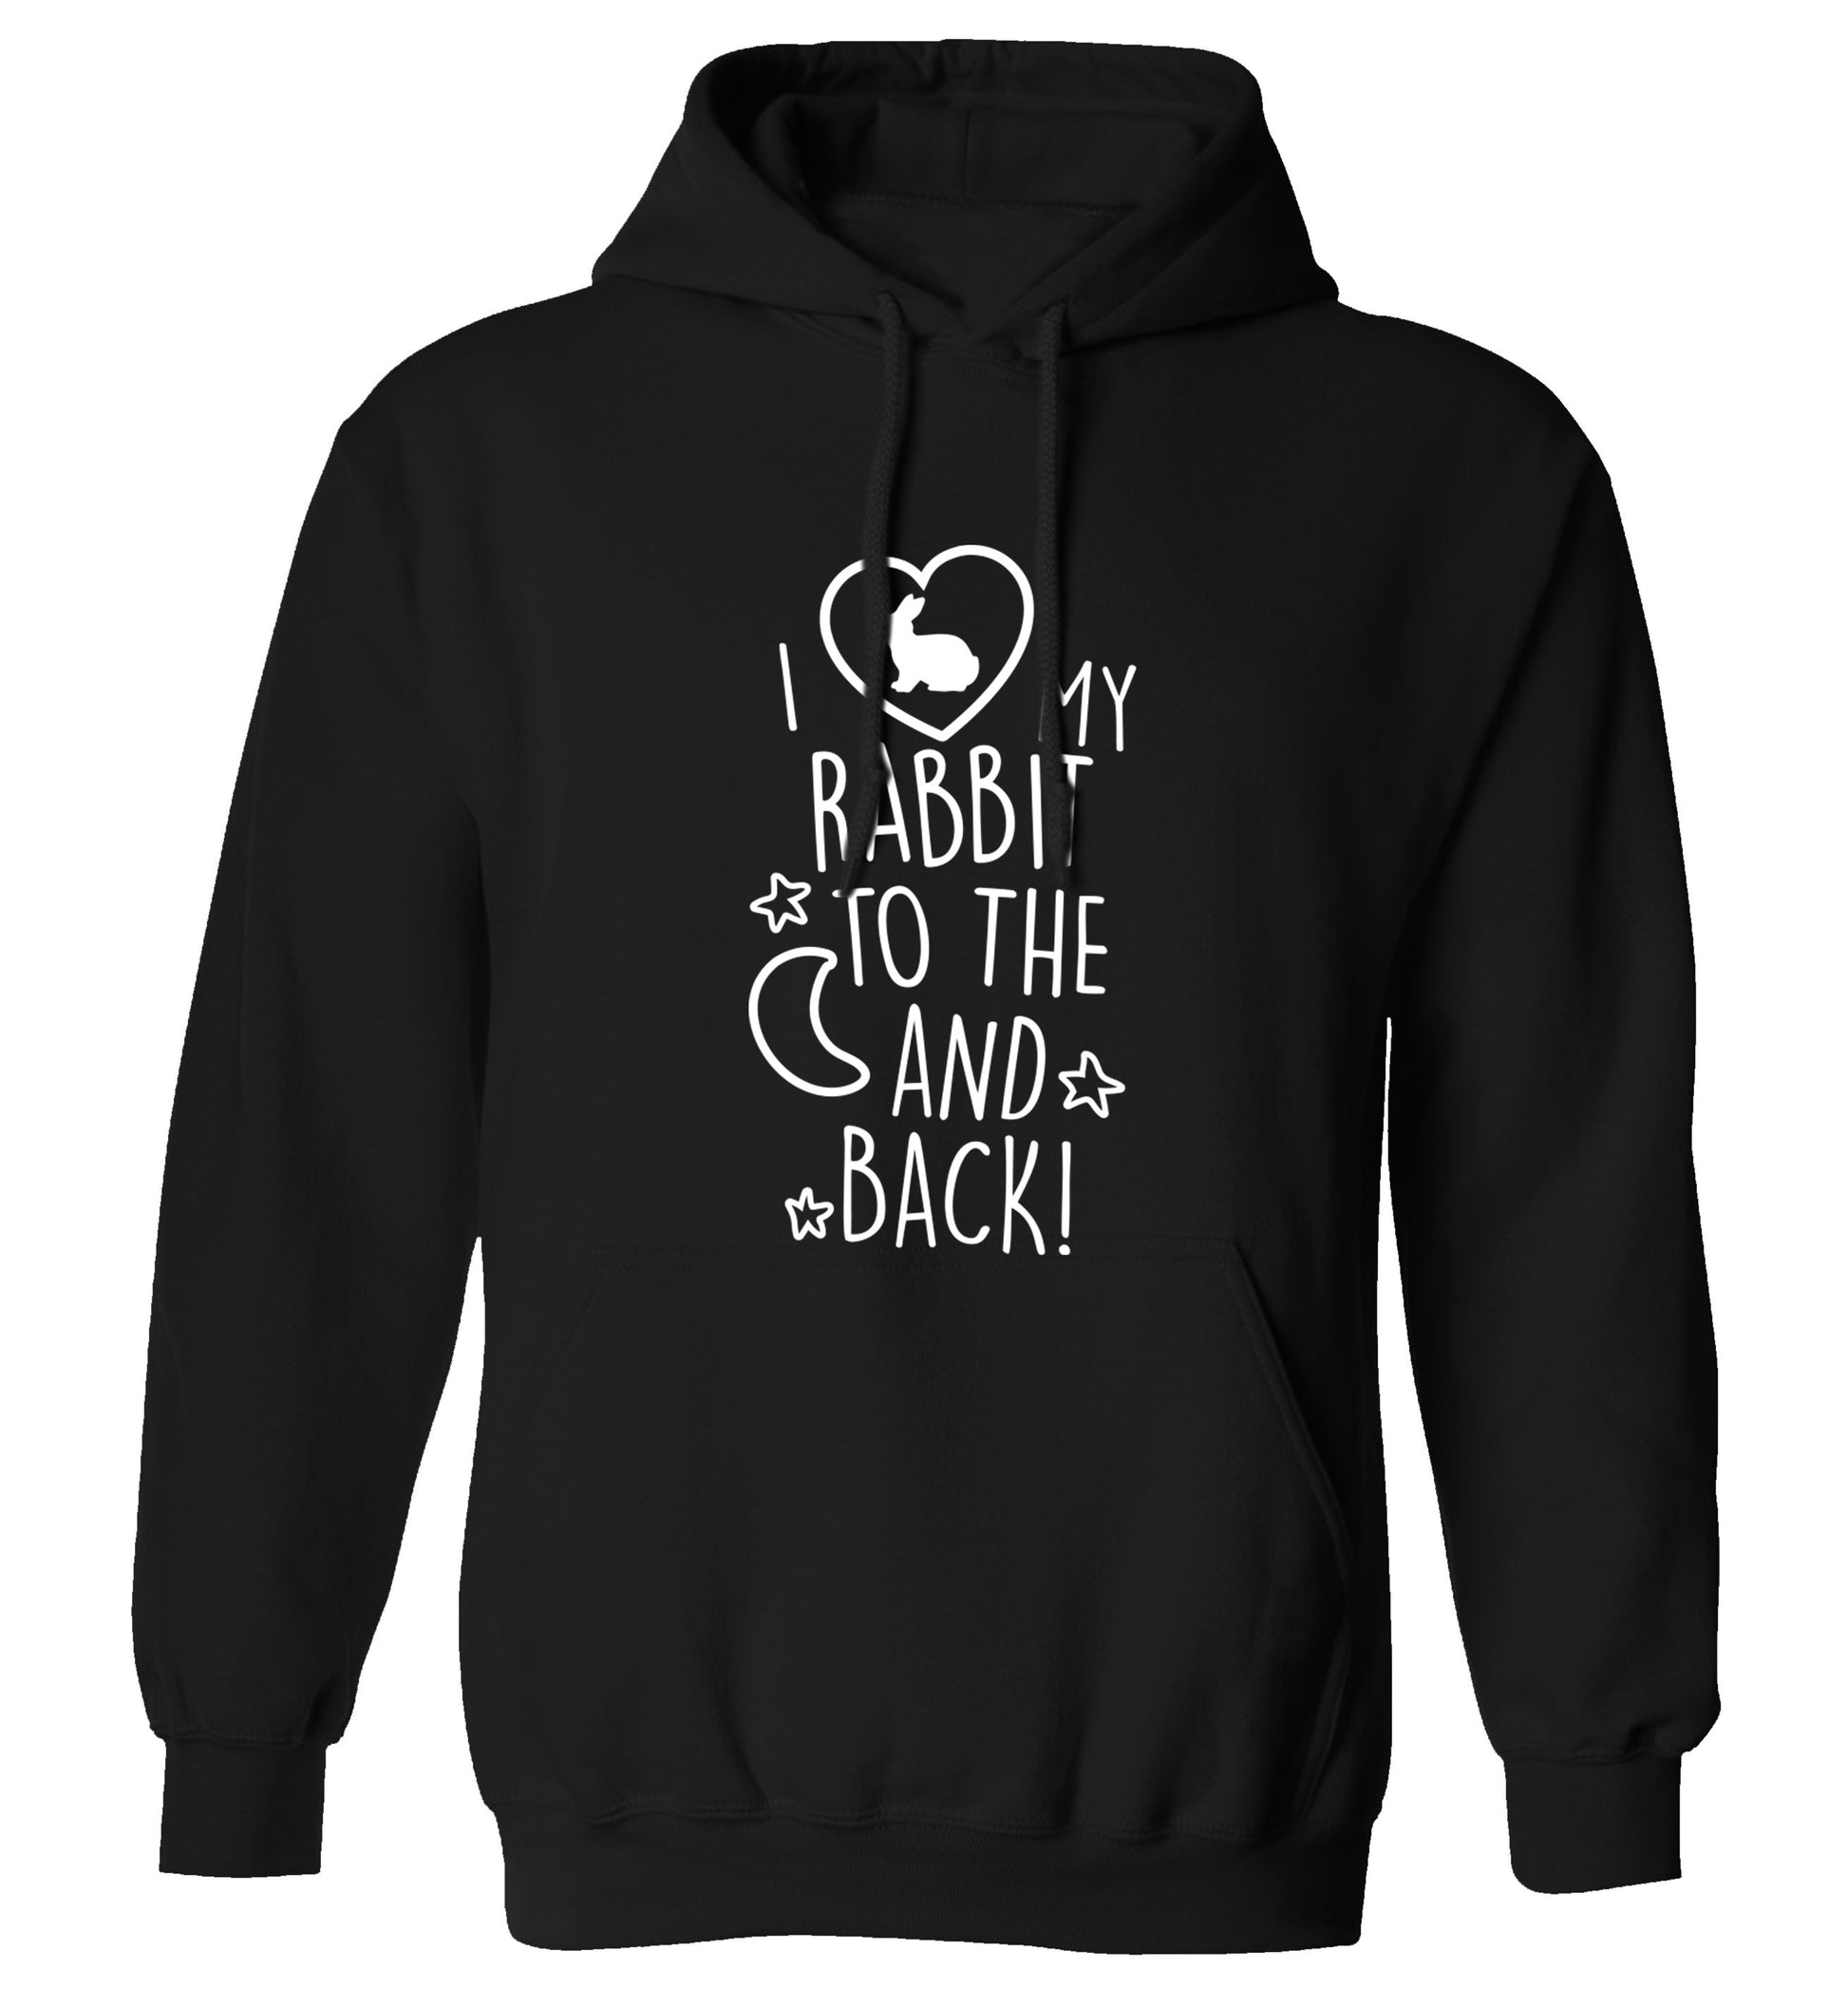 I love my rabbit to the moon and back adults unisex black hoodie 2XL